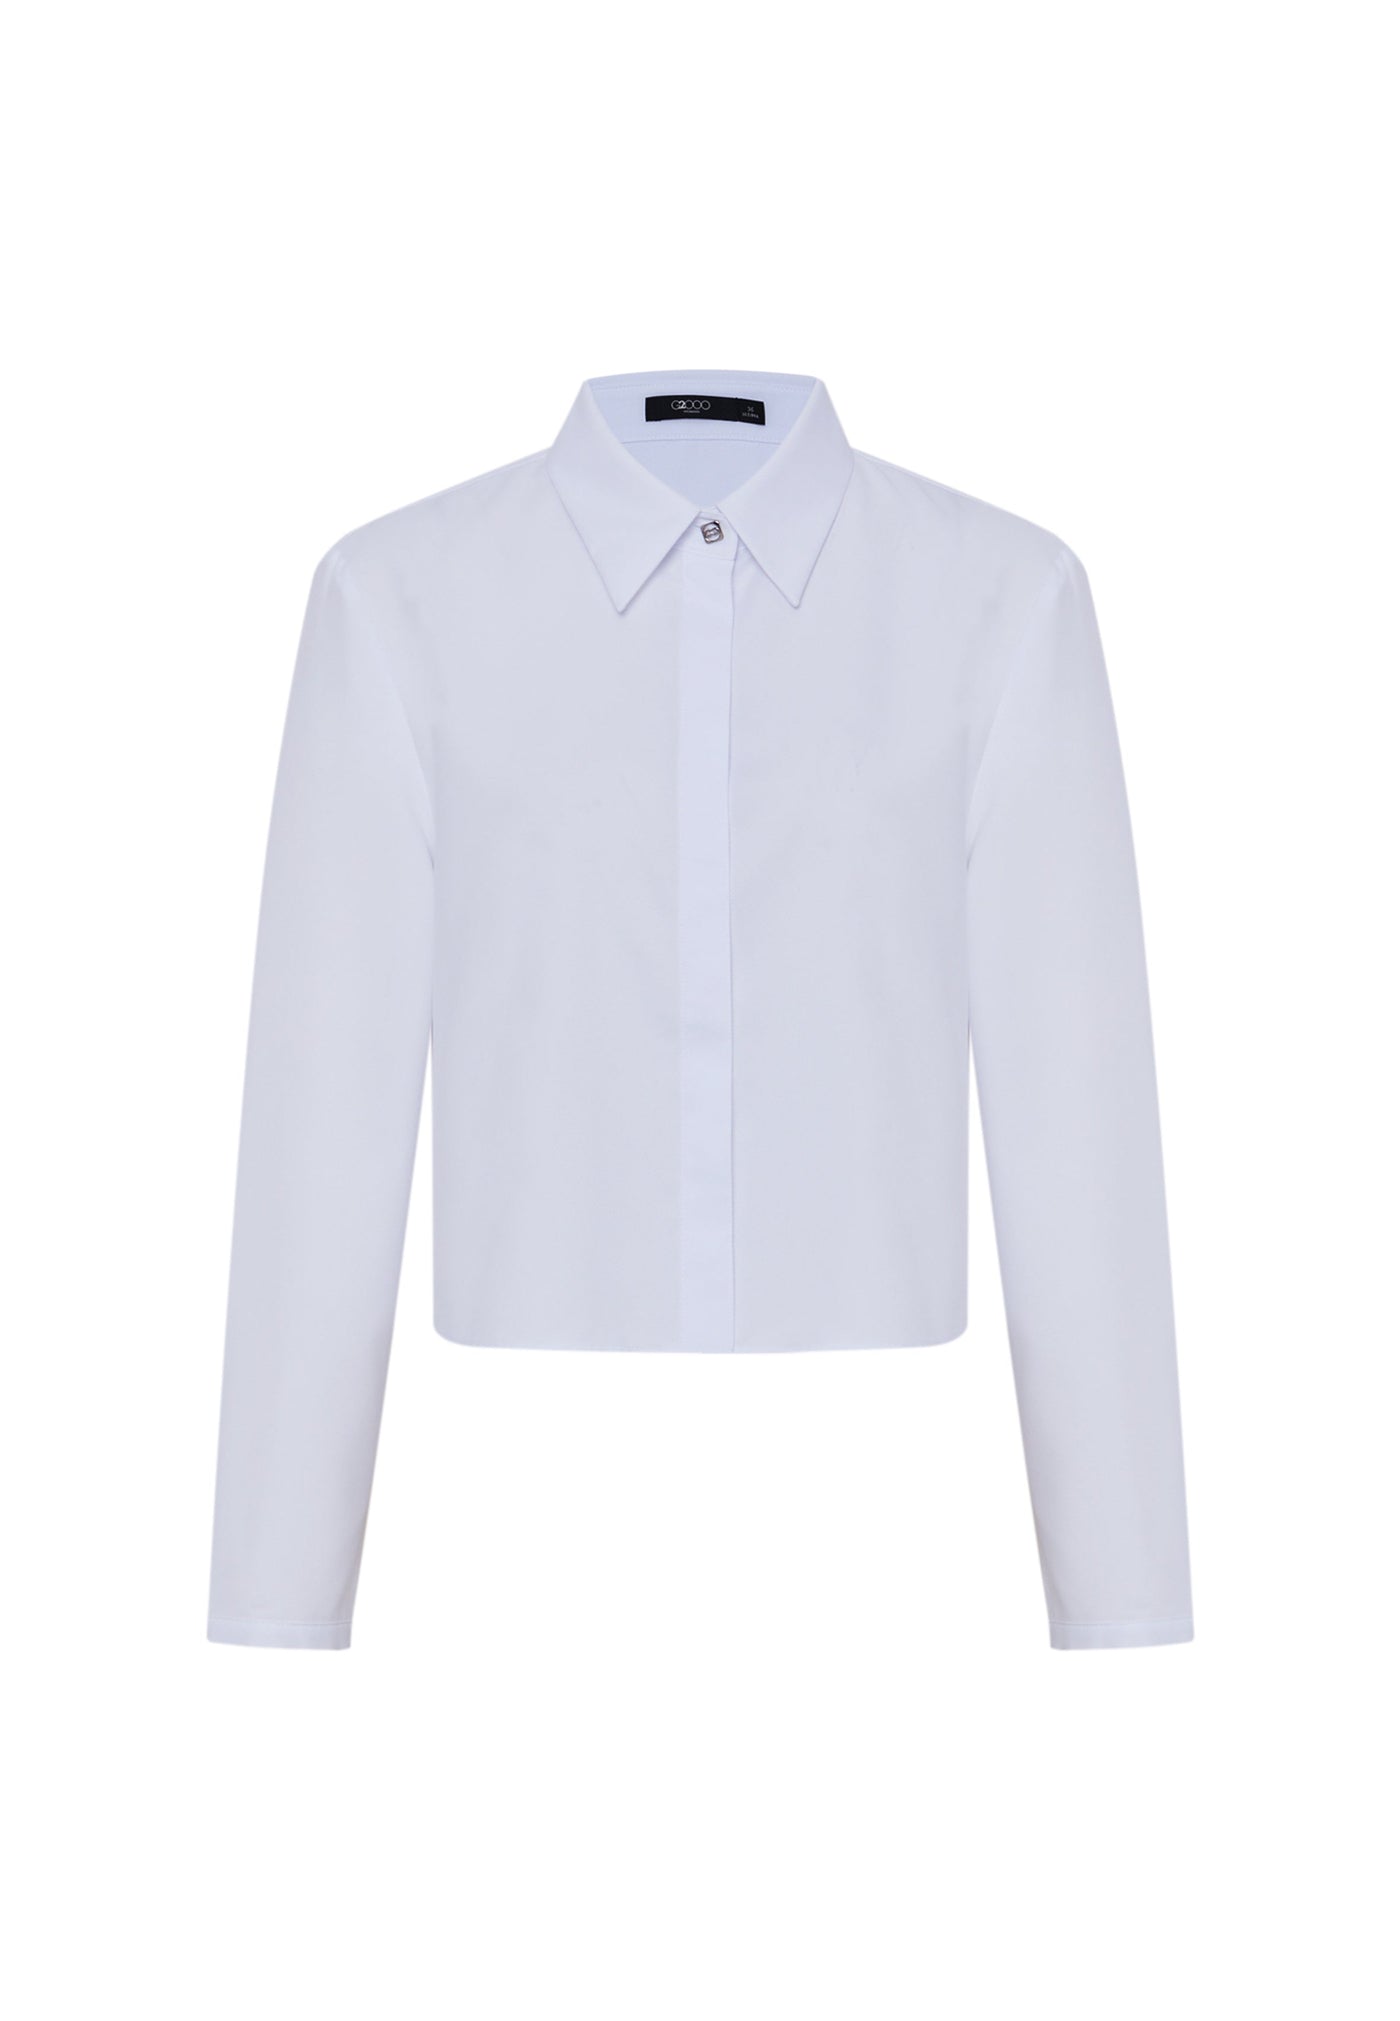 Women Clothing Cobie Cavalry Twill Dry Formal Shirt - Easy Fit